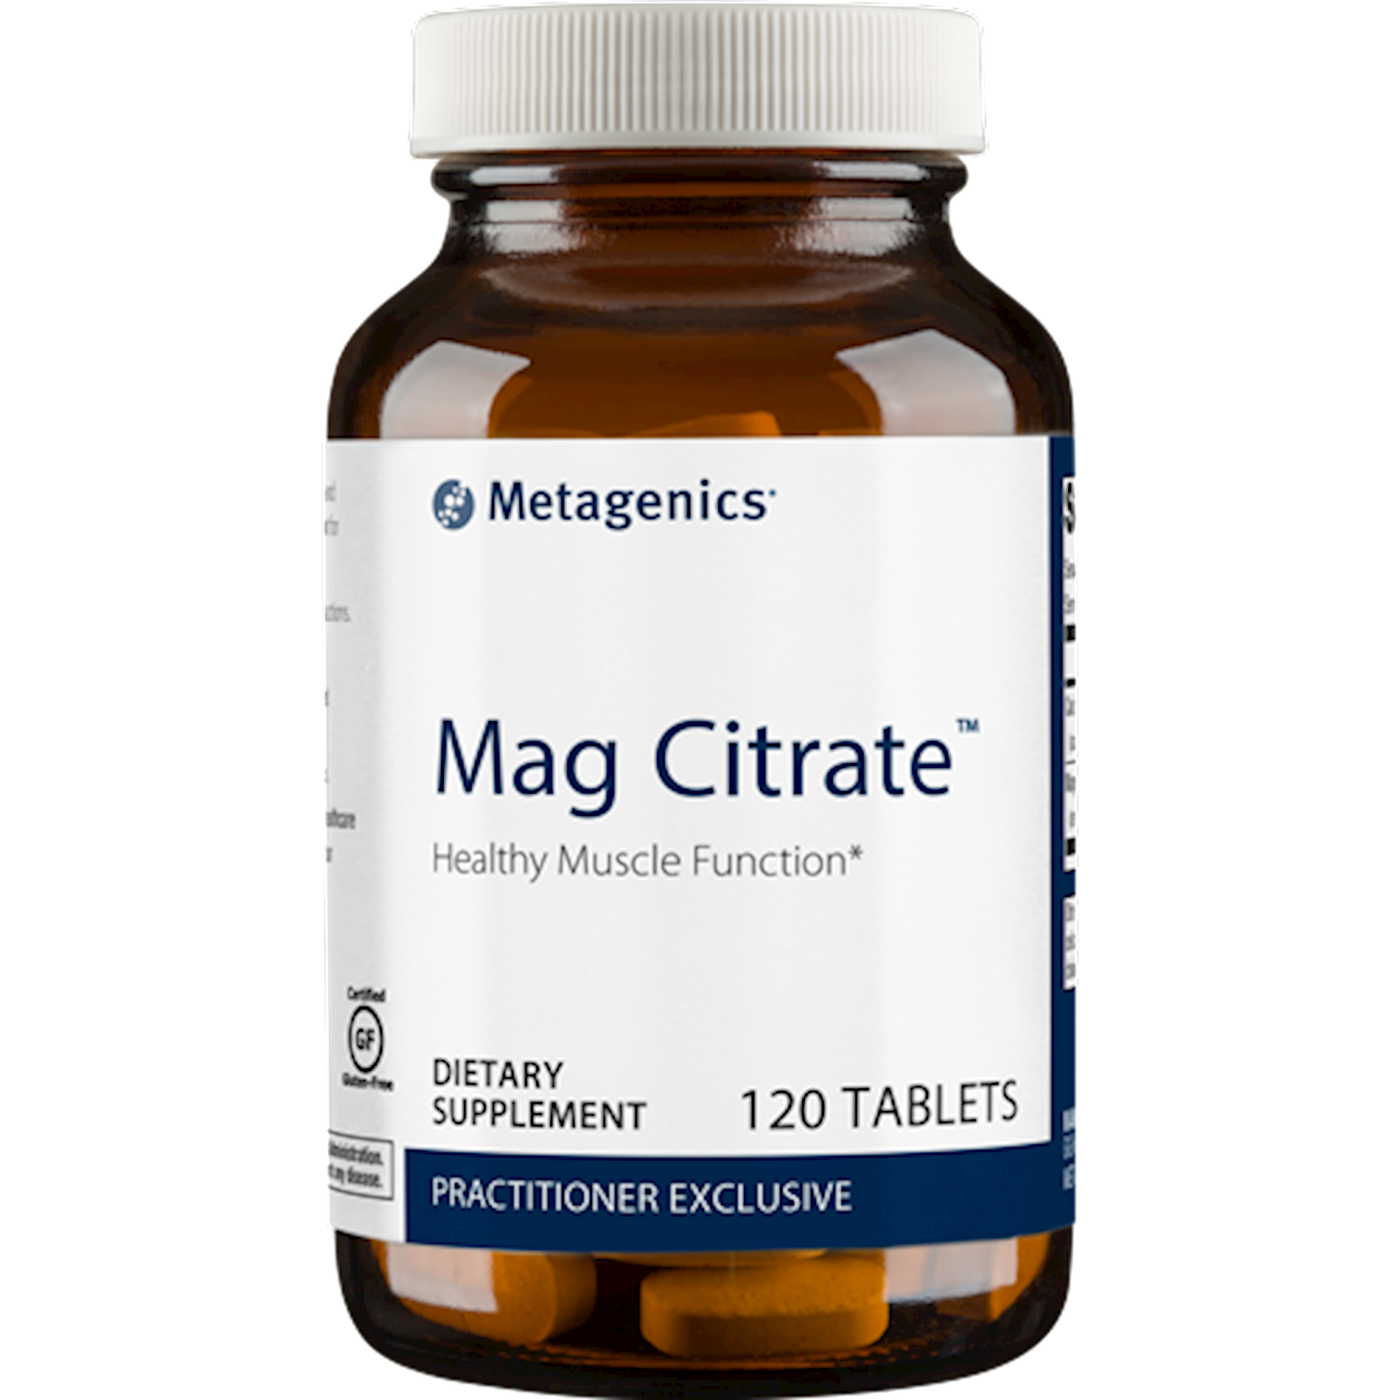 Mag Citrate 120 tabs Curated Wellness